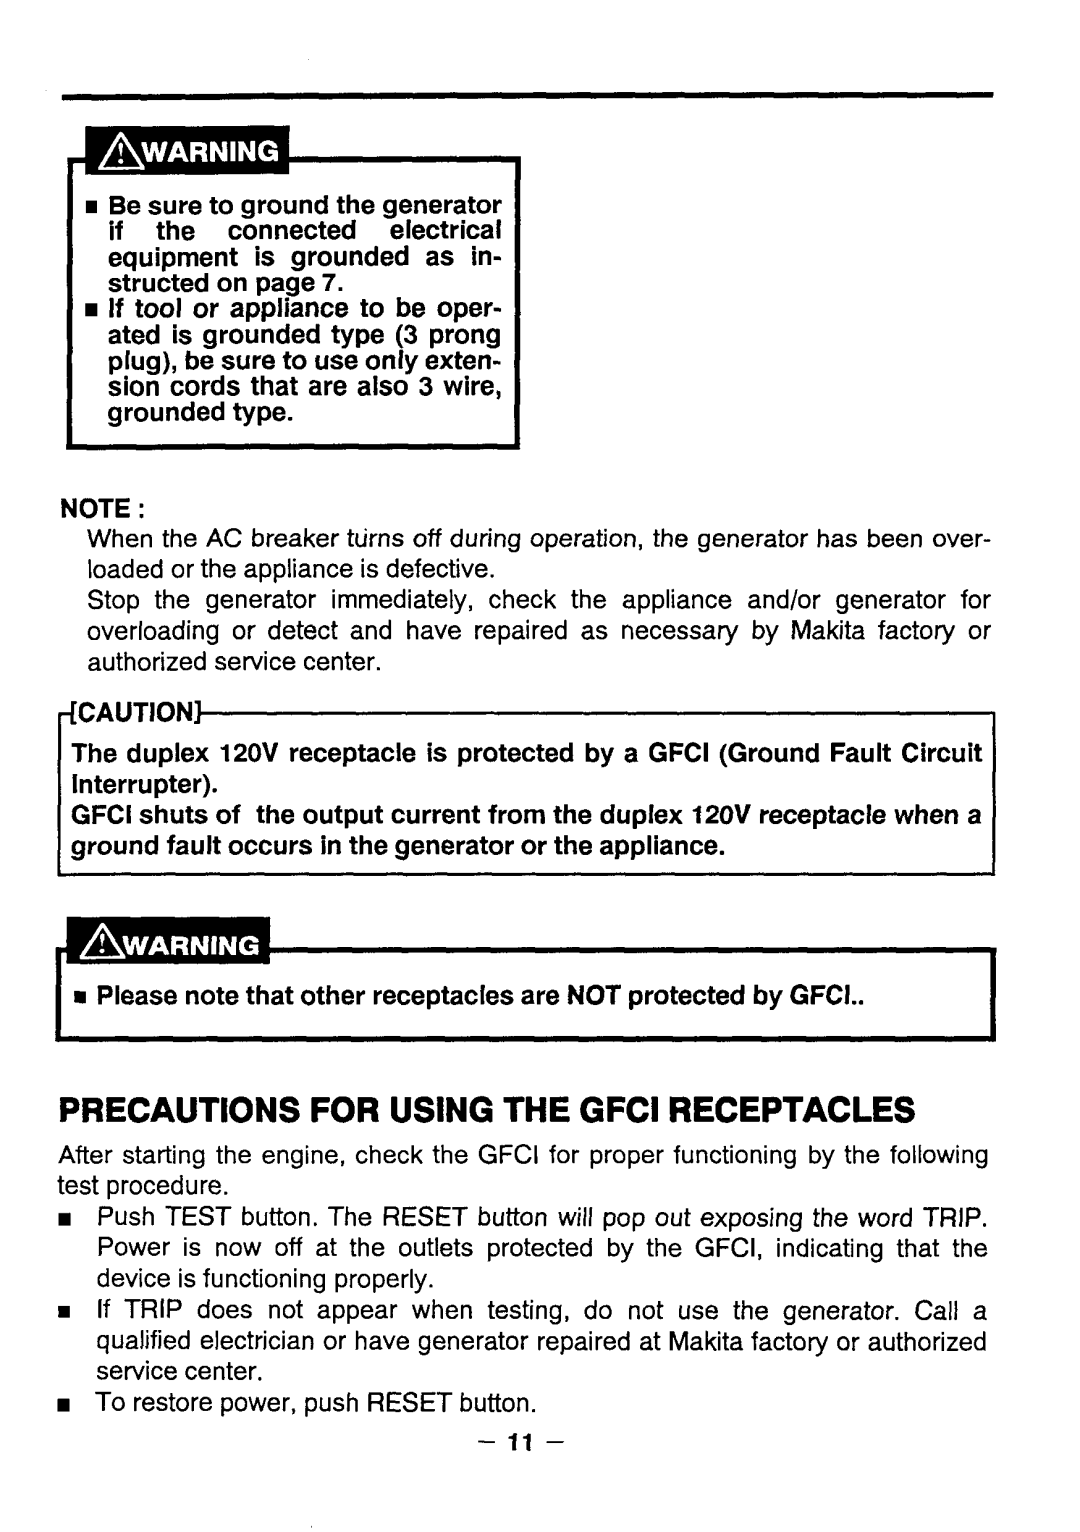 Makita G3511R, G571O R, G5711R, G351O R, G341O R manual PRECAUTIONS FOR USING THE GFCl RECEPTACLES 